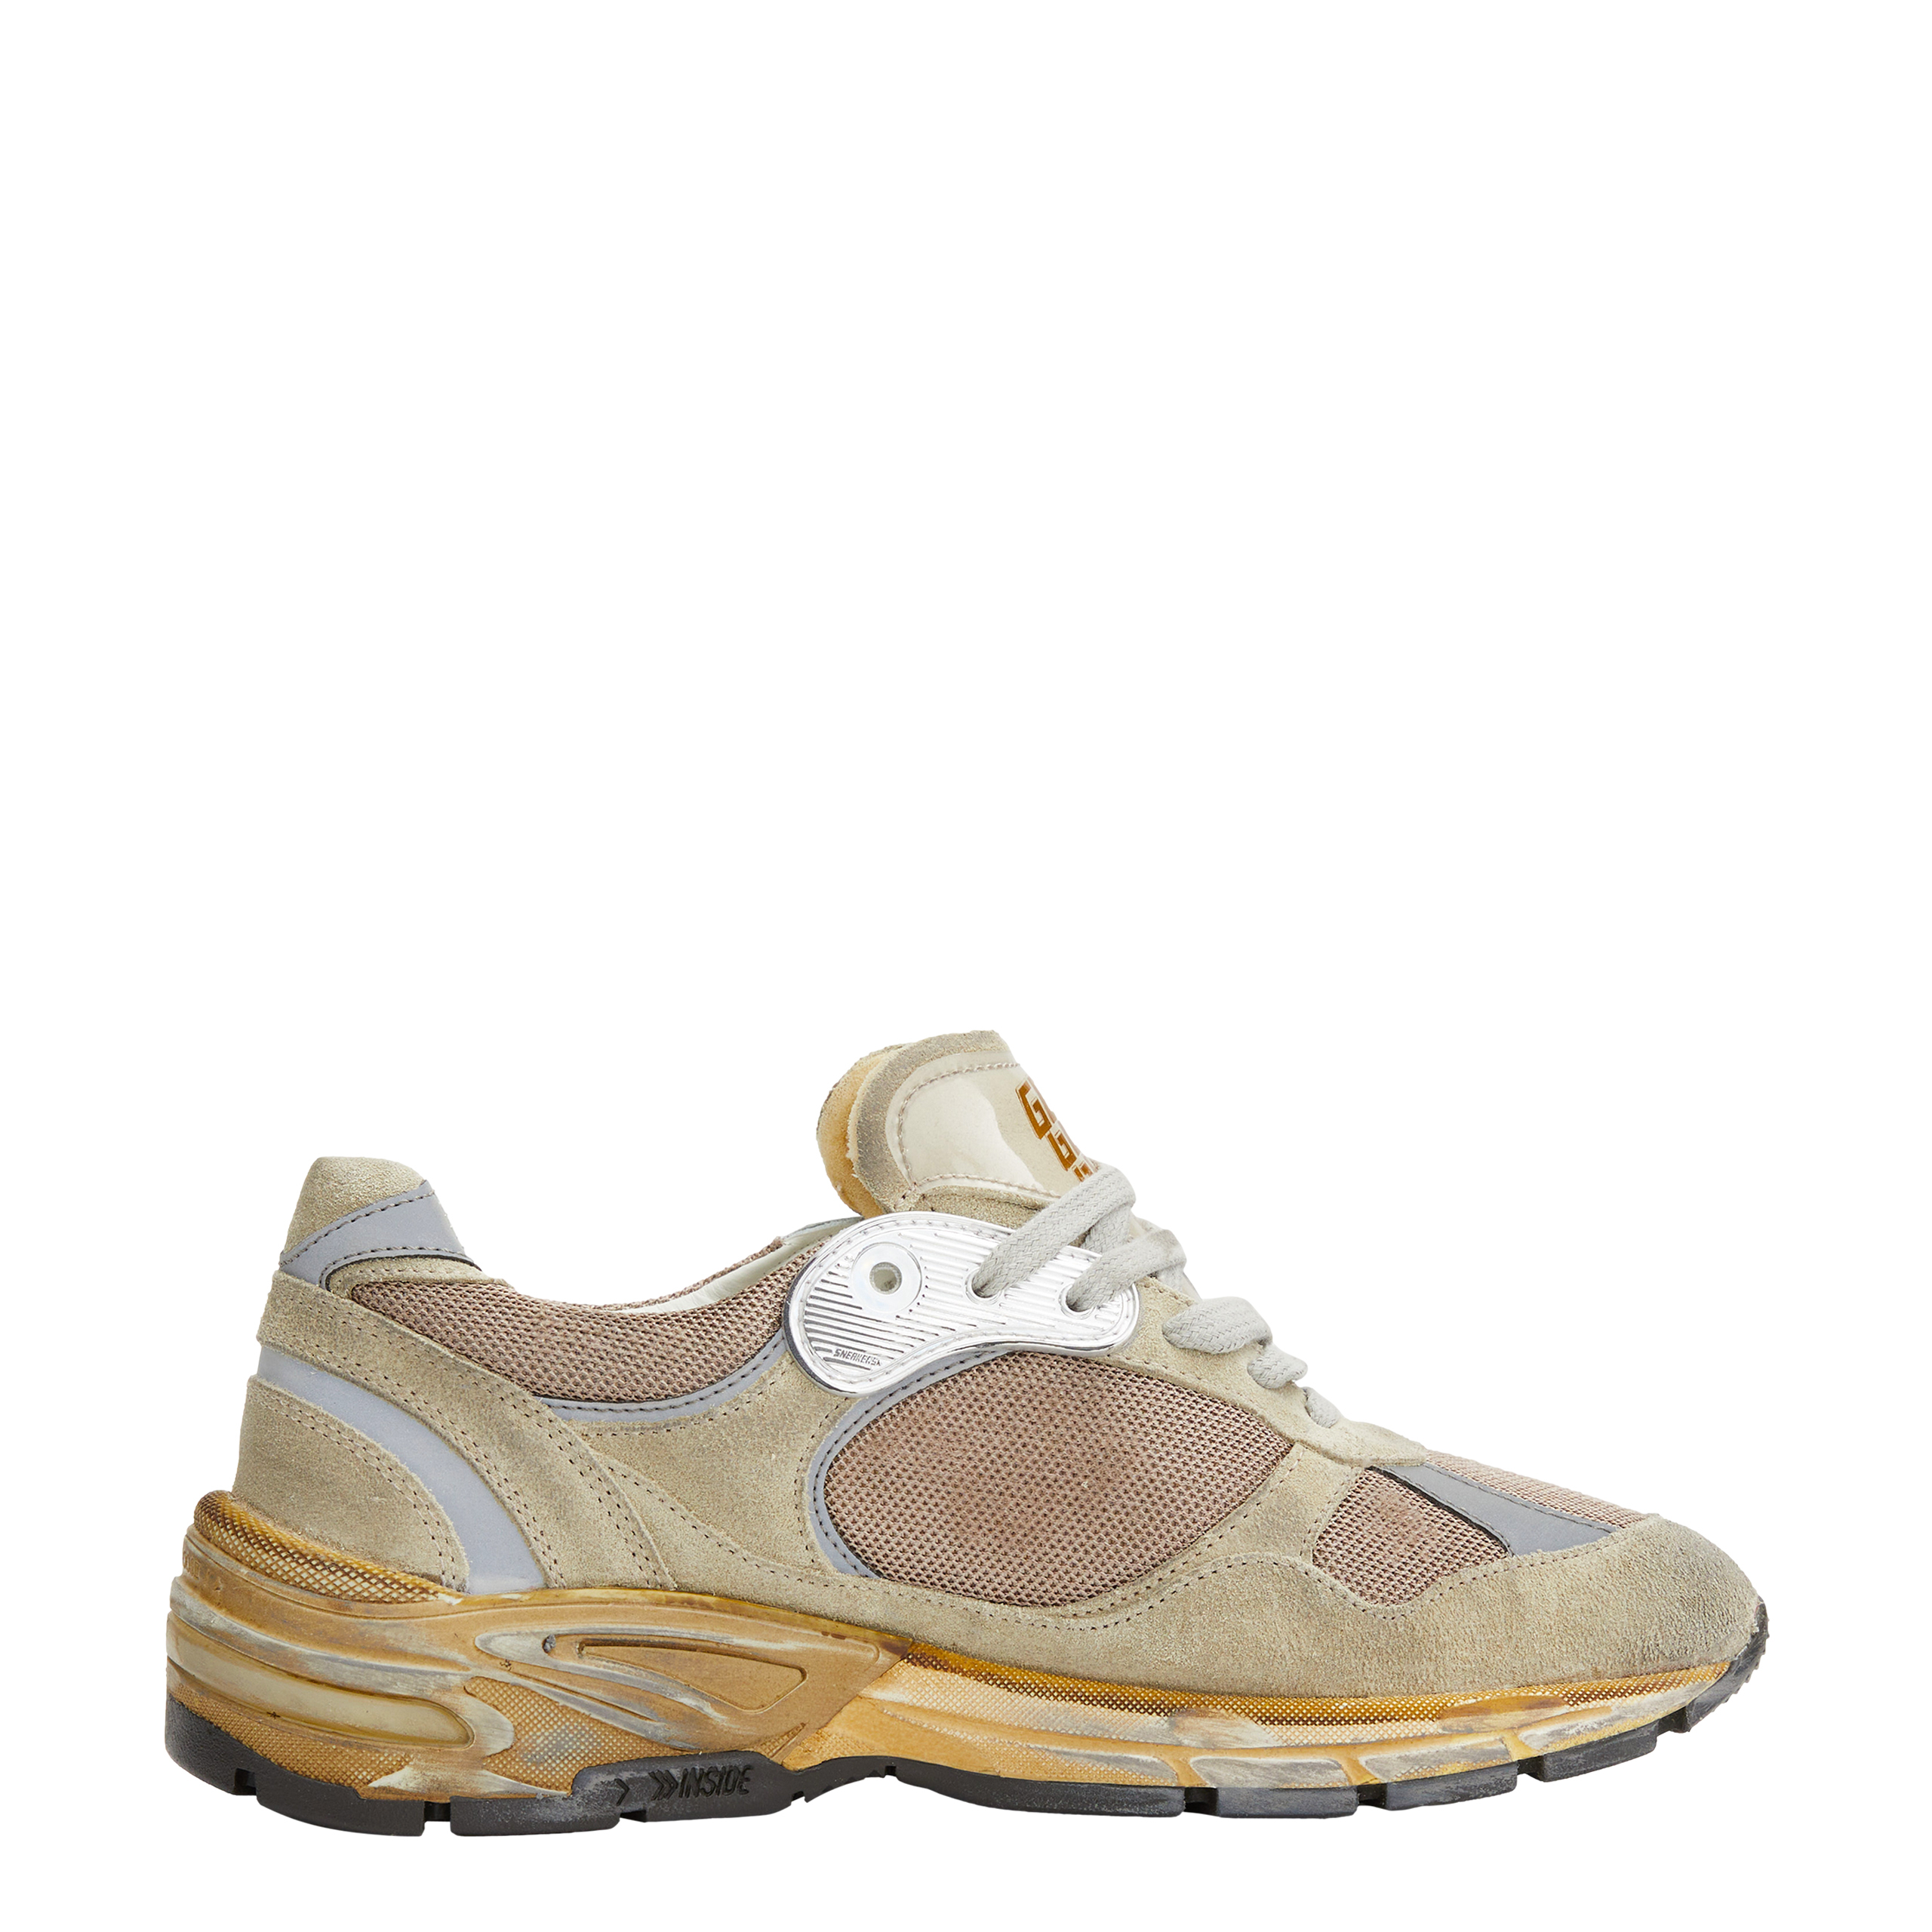 None Golden Goose Deluxe Brand GMF00199/F003271/81751, размер 40;41;42;43;44;45;46 GMF00199/F003271/81751 - фото 6